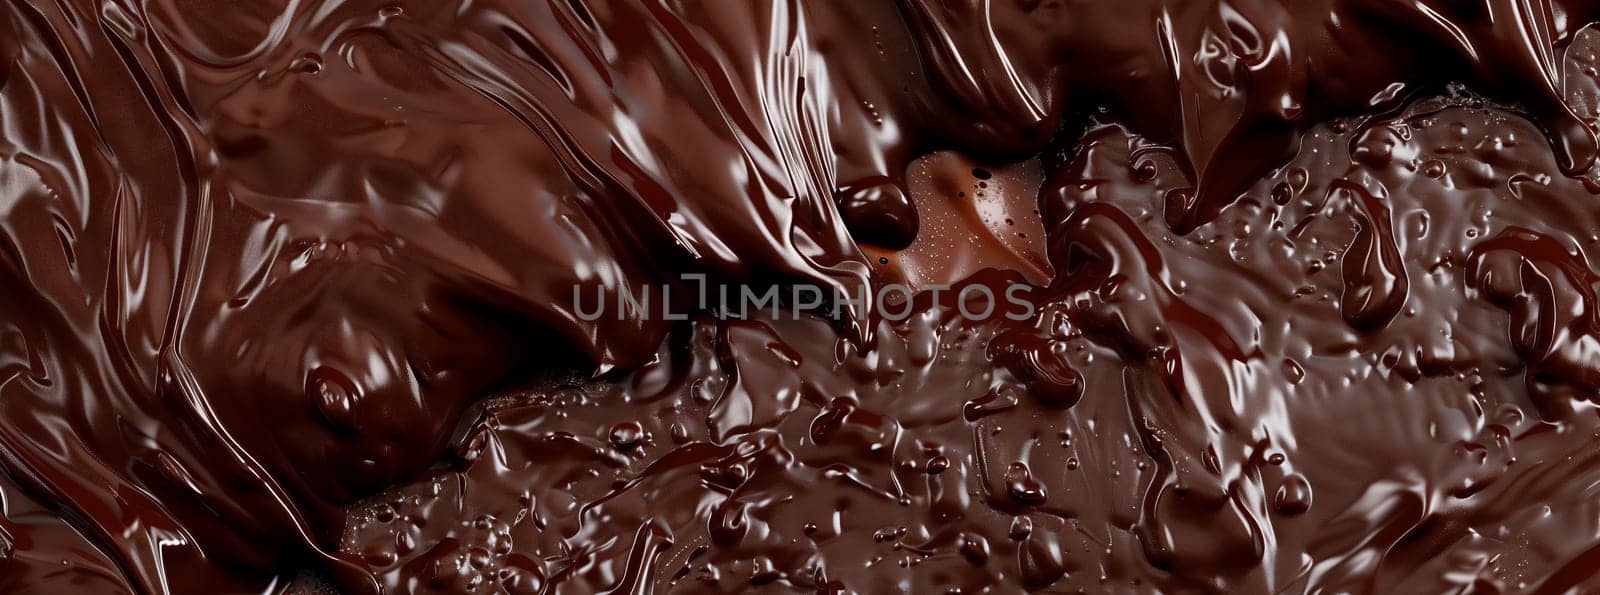 a close up of melted chocolate on a table by richwolf